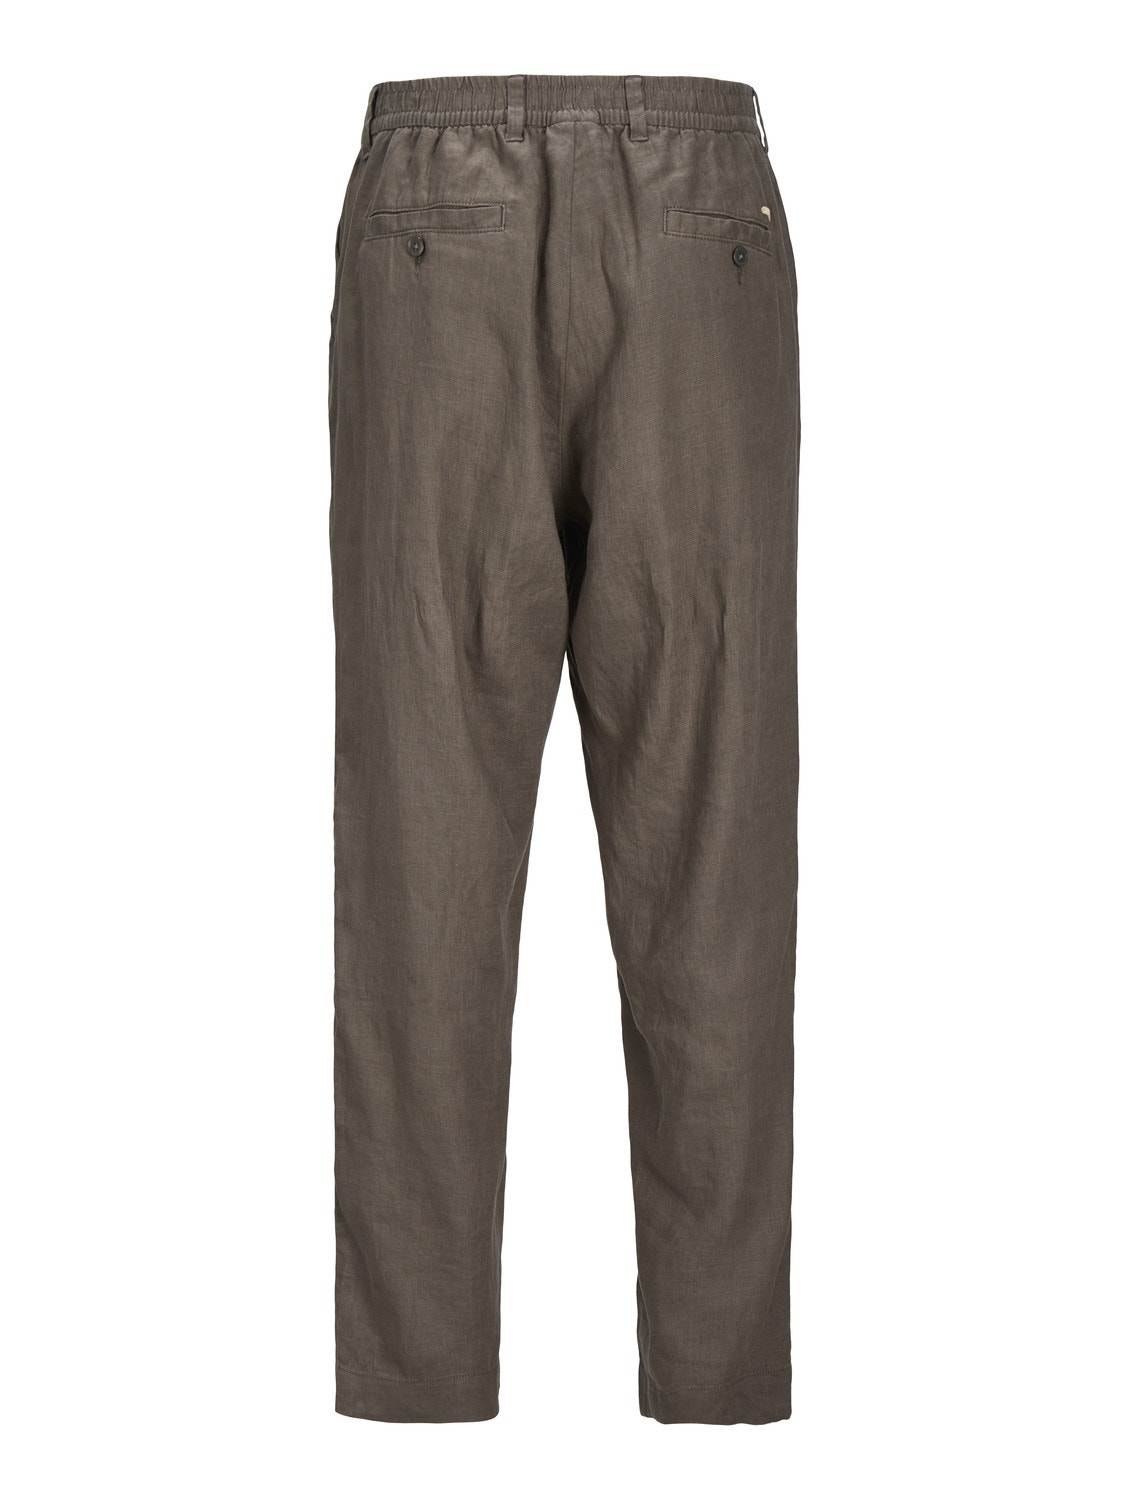 Jack & Jones Loose Fit Chino trousers -Falcon - 12253120